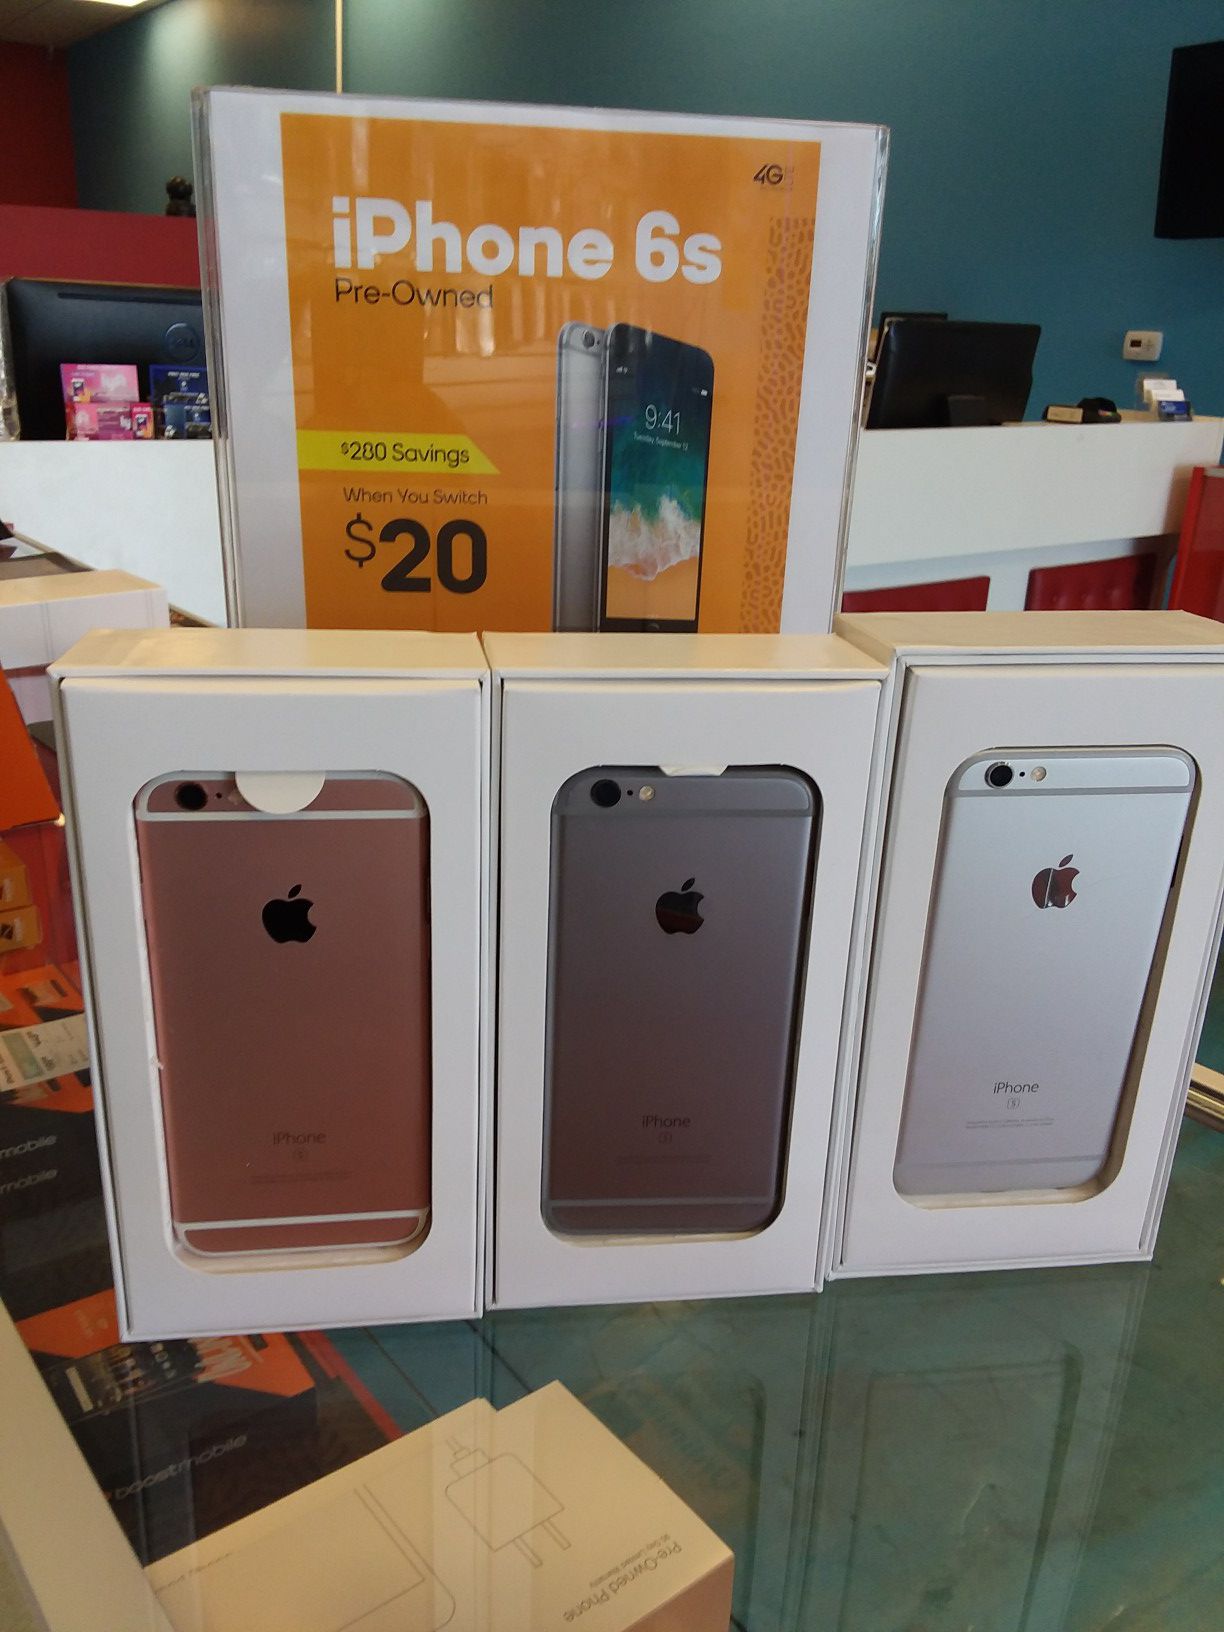 IPhone 6s PRE-OWNED FOR ONLY $20🤑🤑 WHEN YOU SWITCH TO BOOST MOBILE!!!